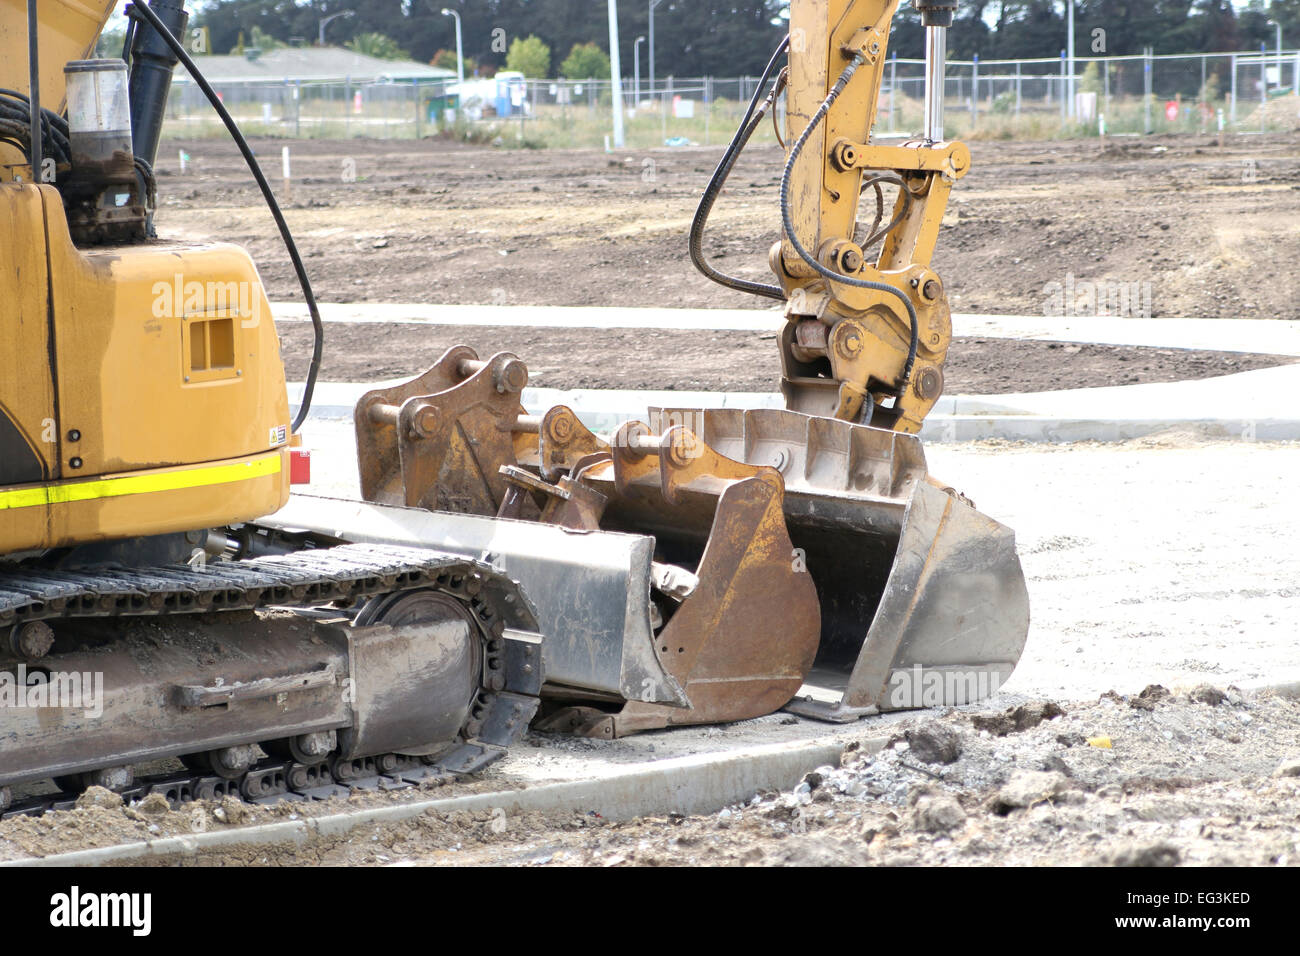 Mechanical Digger  or Excavator, digger buckets Stock Photo